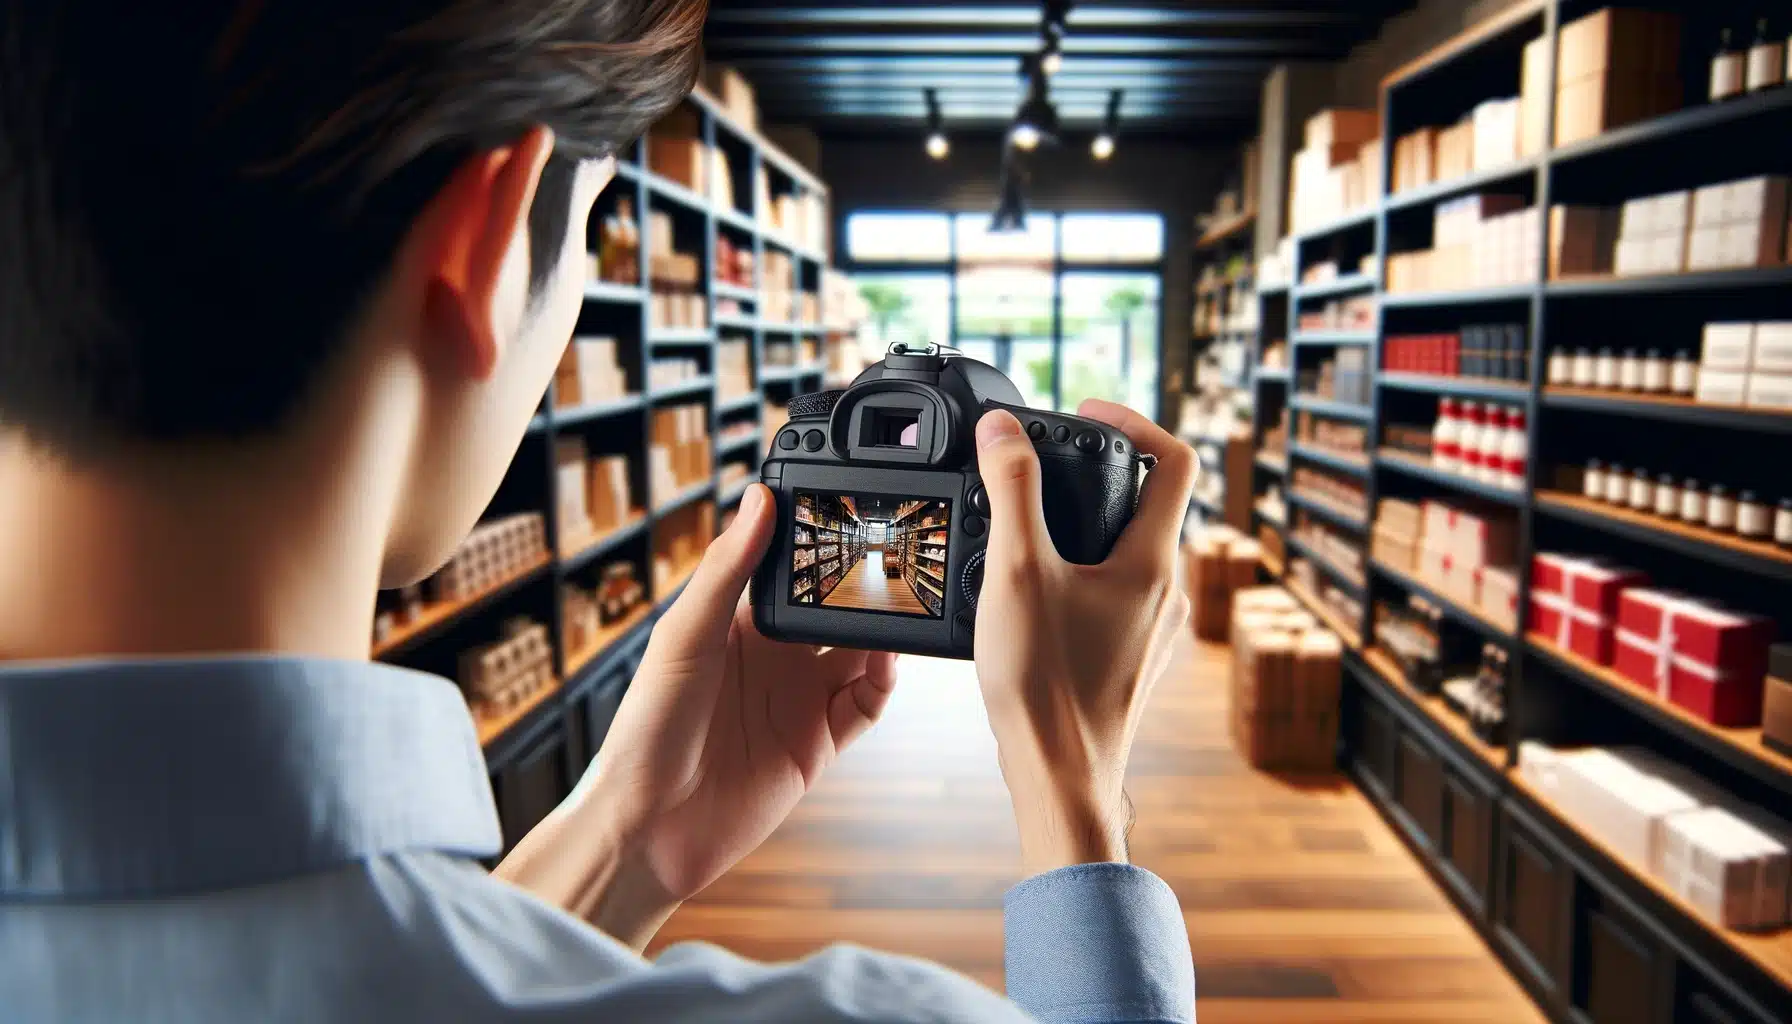 A person capturing a photo of a well-lit retail store using a professional camera. The store has various products neatly arranged on shelves.